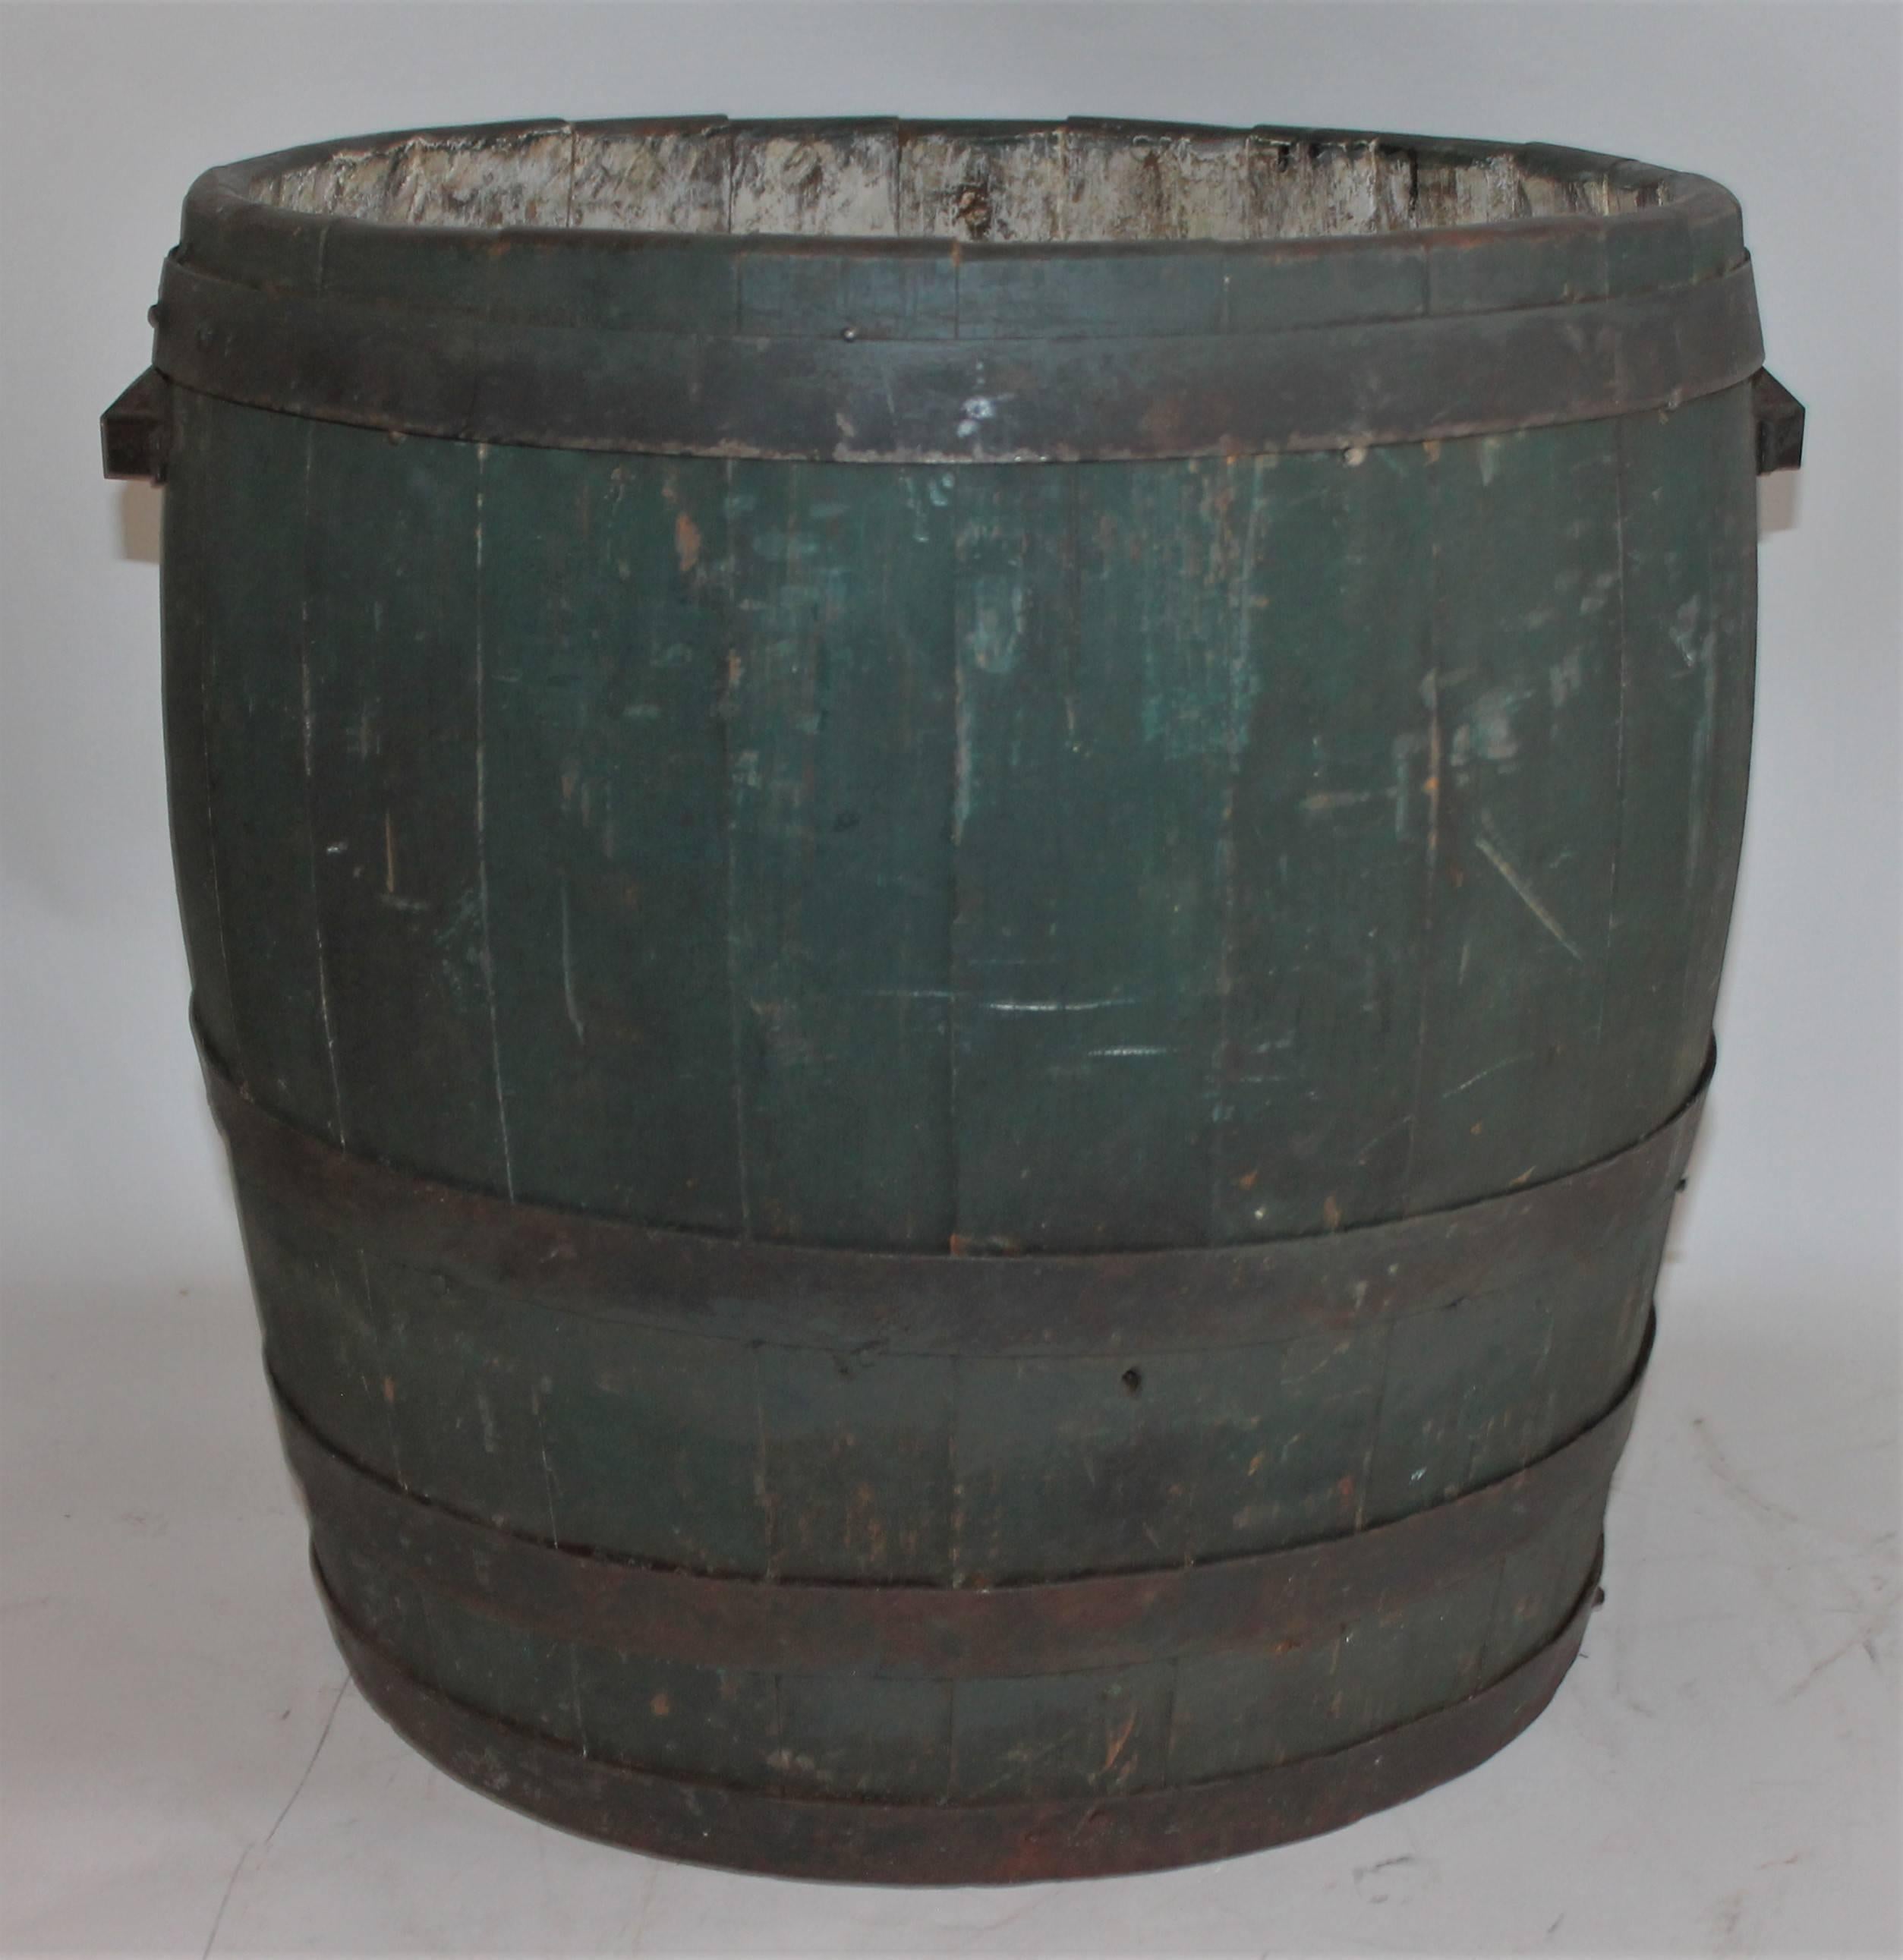 This country farmhouse original painted country barrel has cast iron original handles and is in good as found condition. Great on a front porch or in a kitchen.